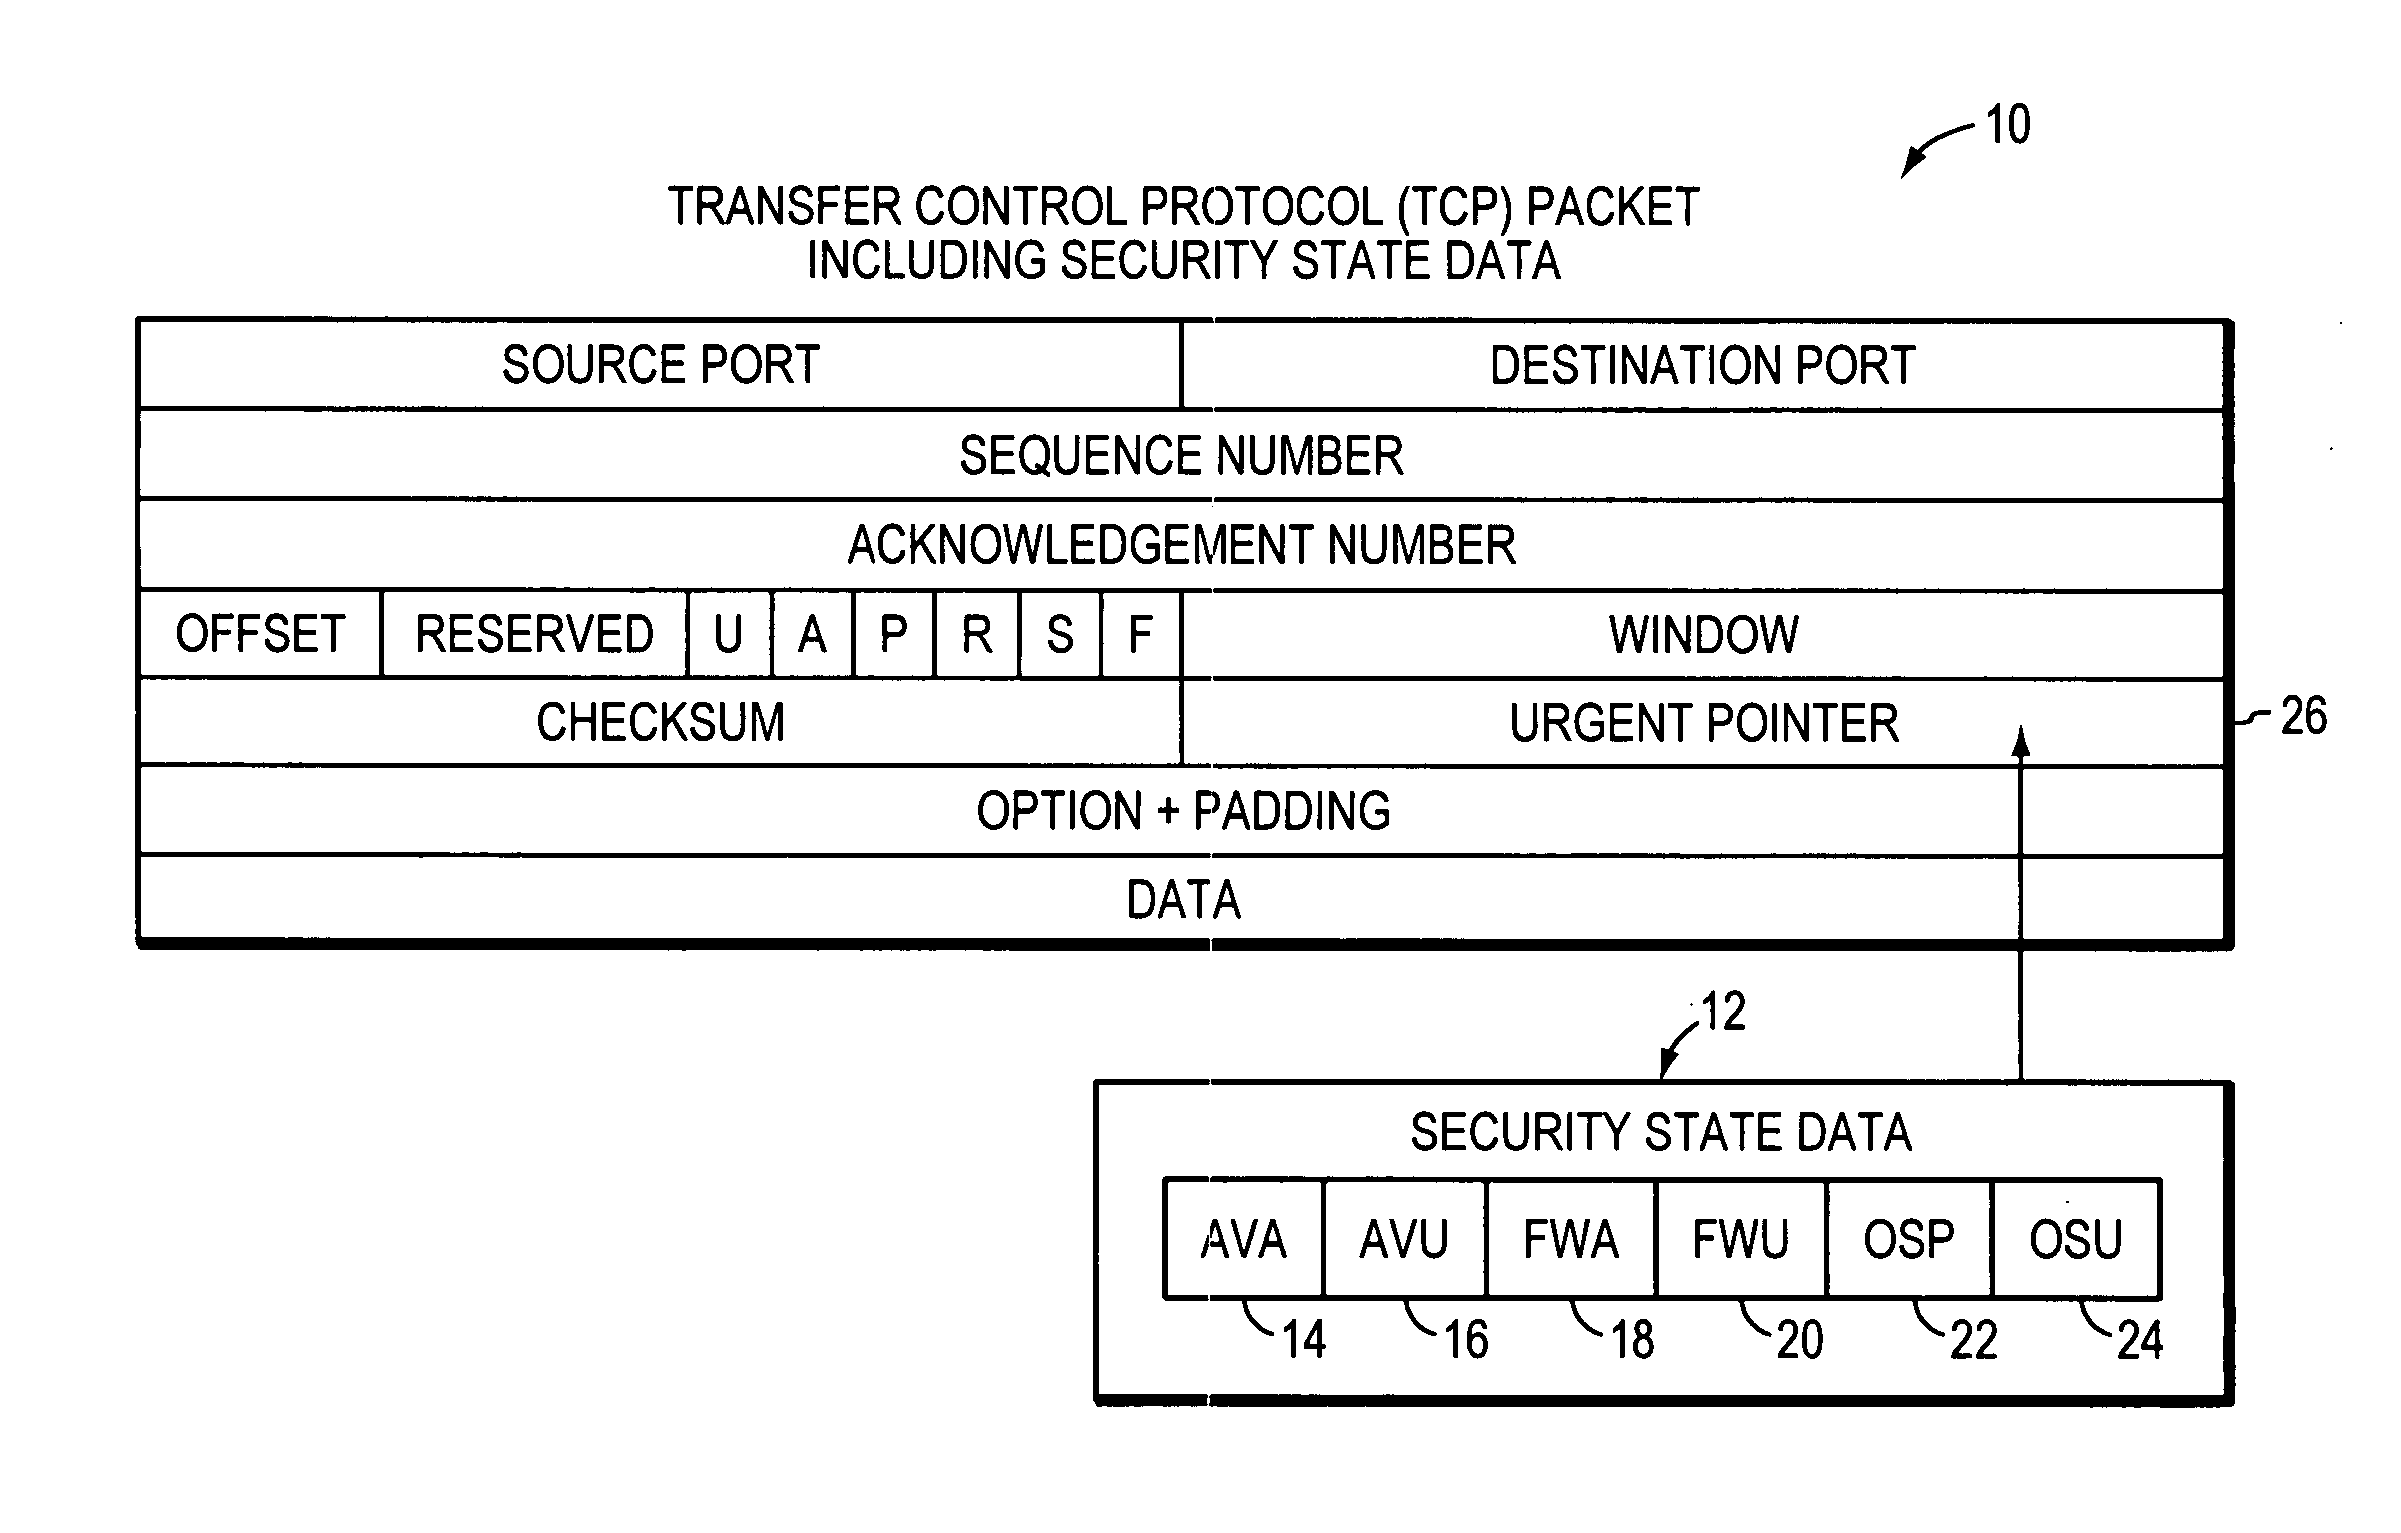 System, apparatuses, methods and computer-readable media for determining security status of computer before establishing network connection second group of embodiments-claim set III